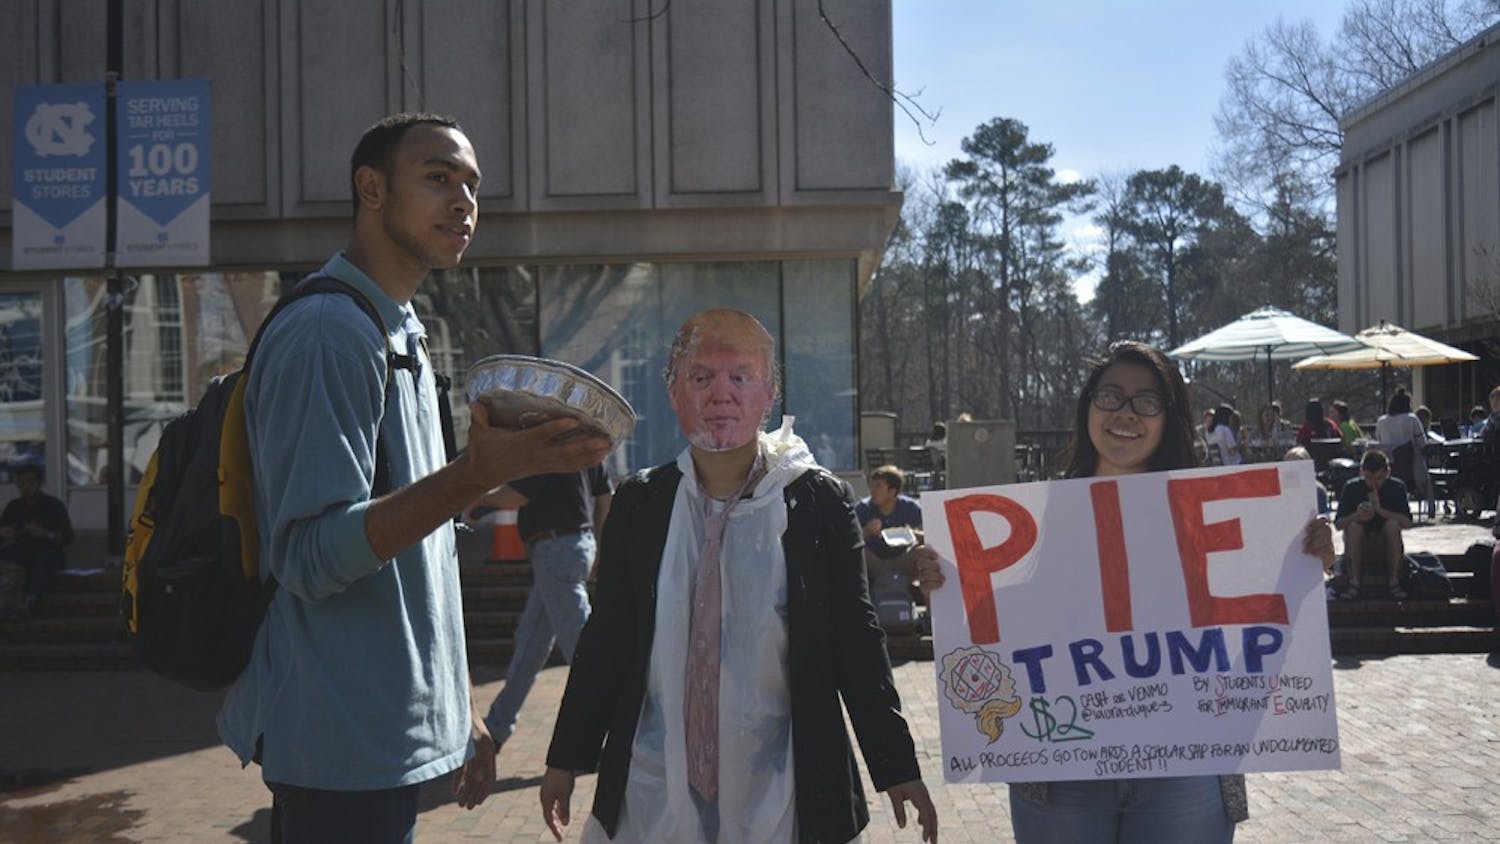 SUIE holds a Pie Trump Event to raise money for scholarships for undocumented students